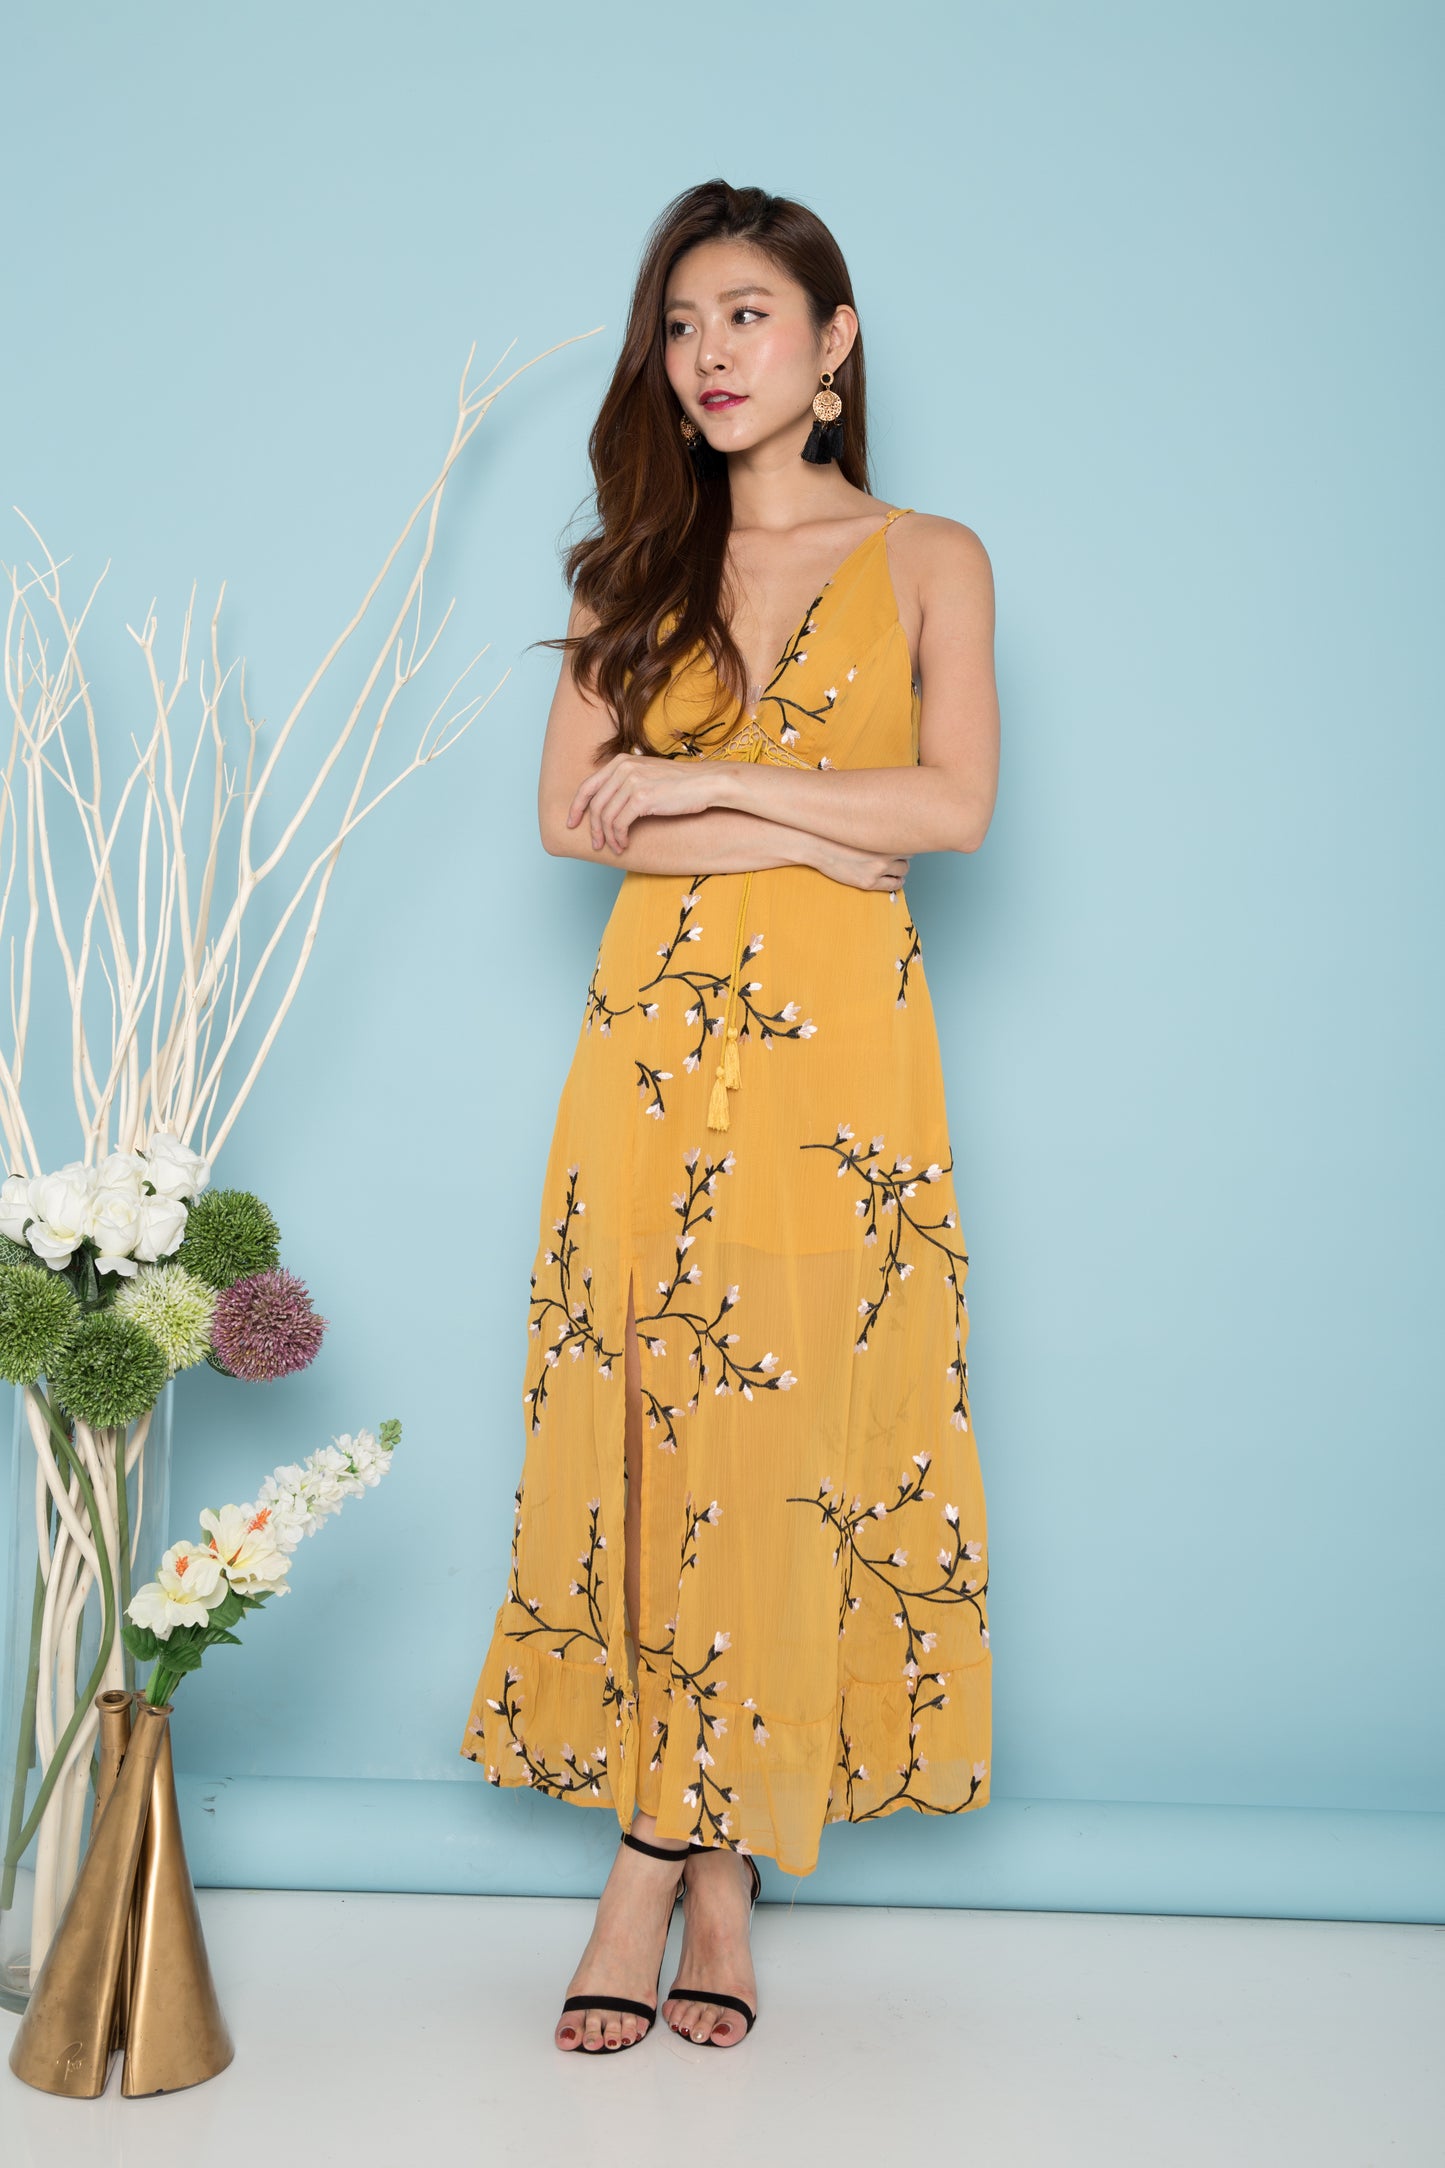 LUXE - Vealla Sunshine Floral Maxi Dress